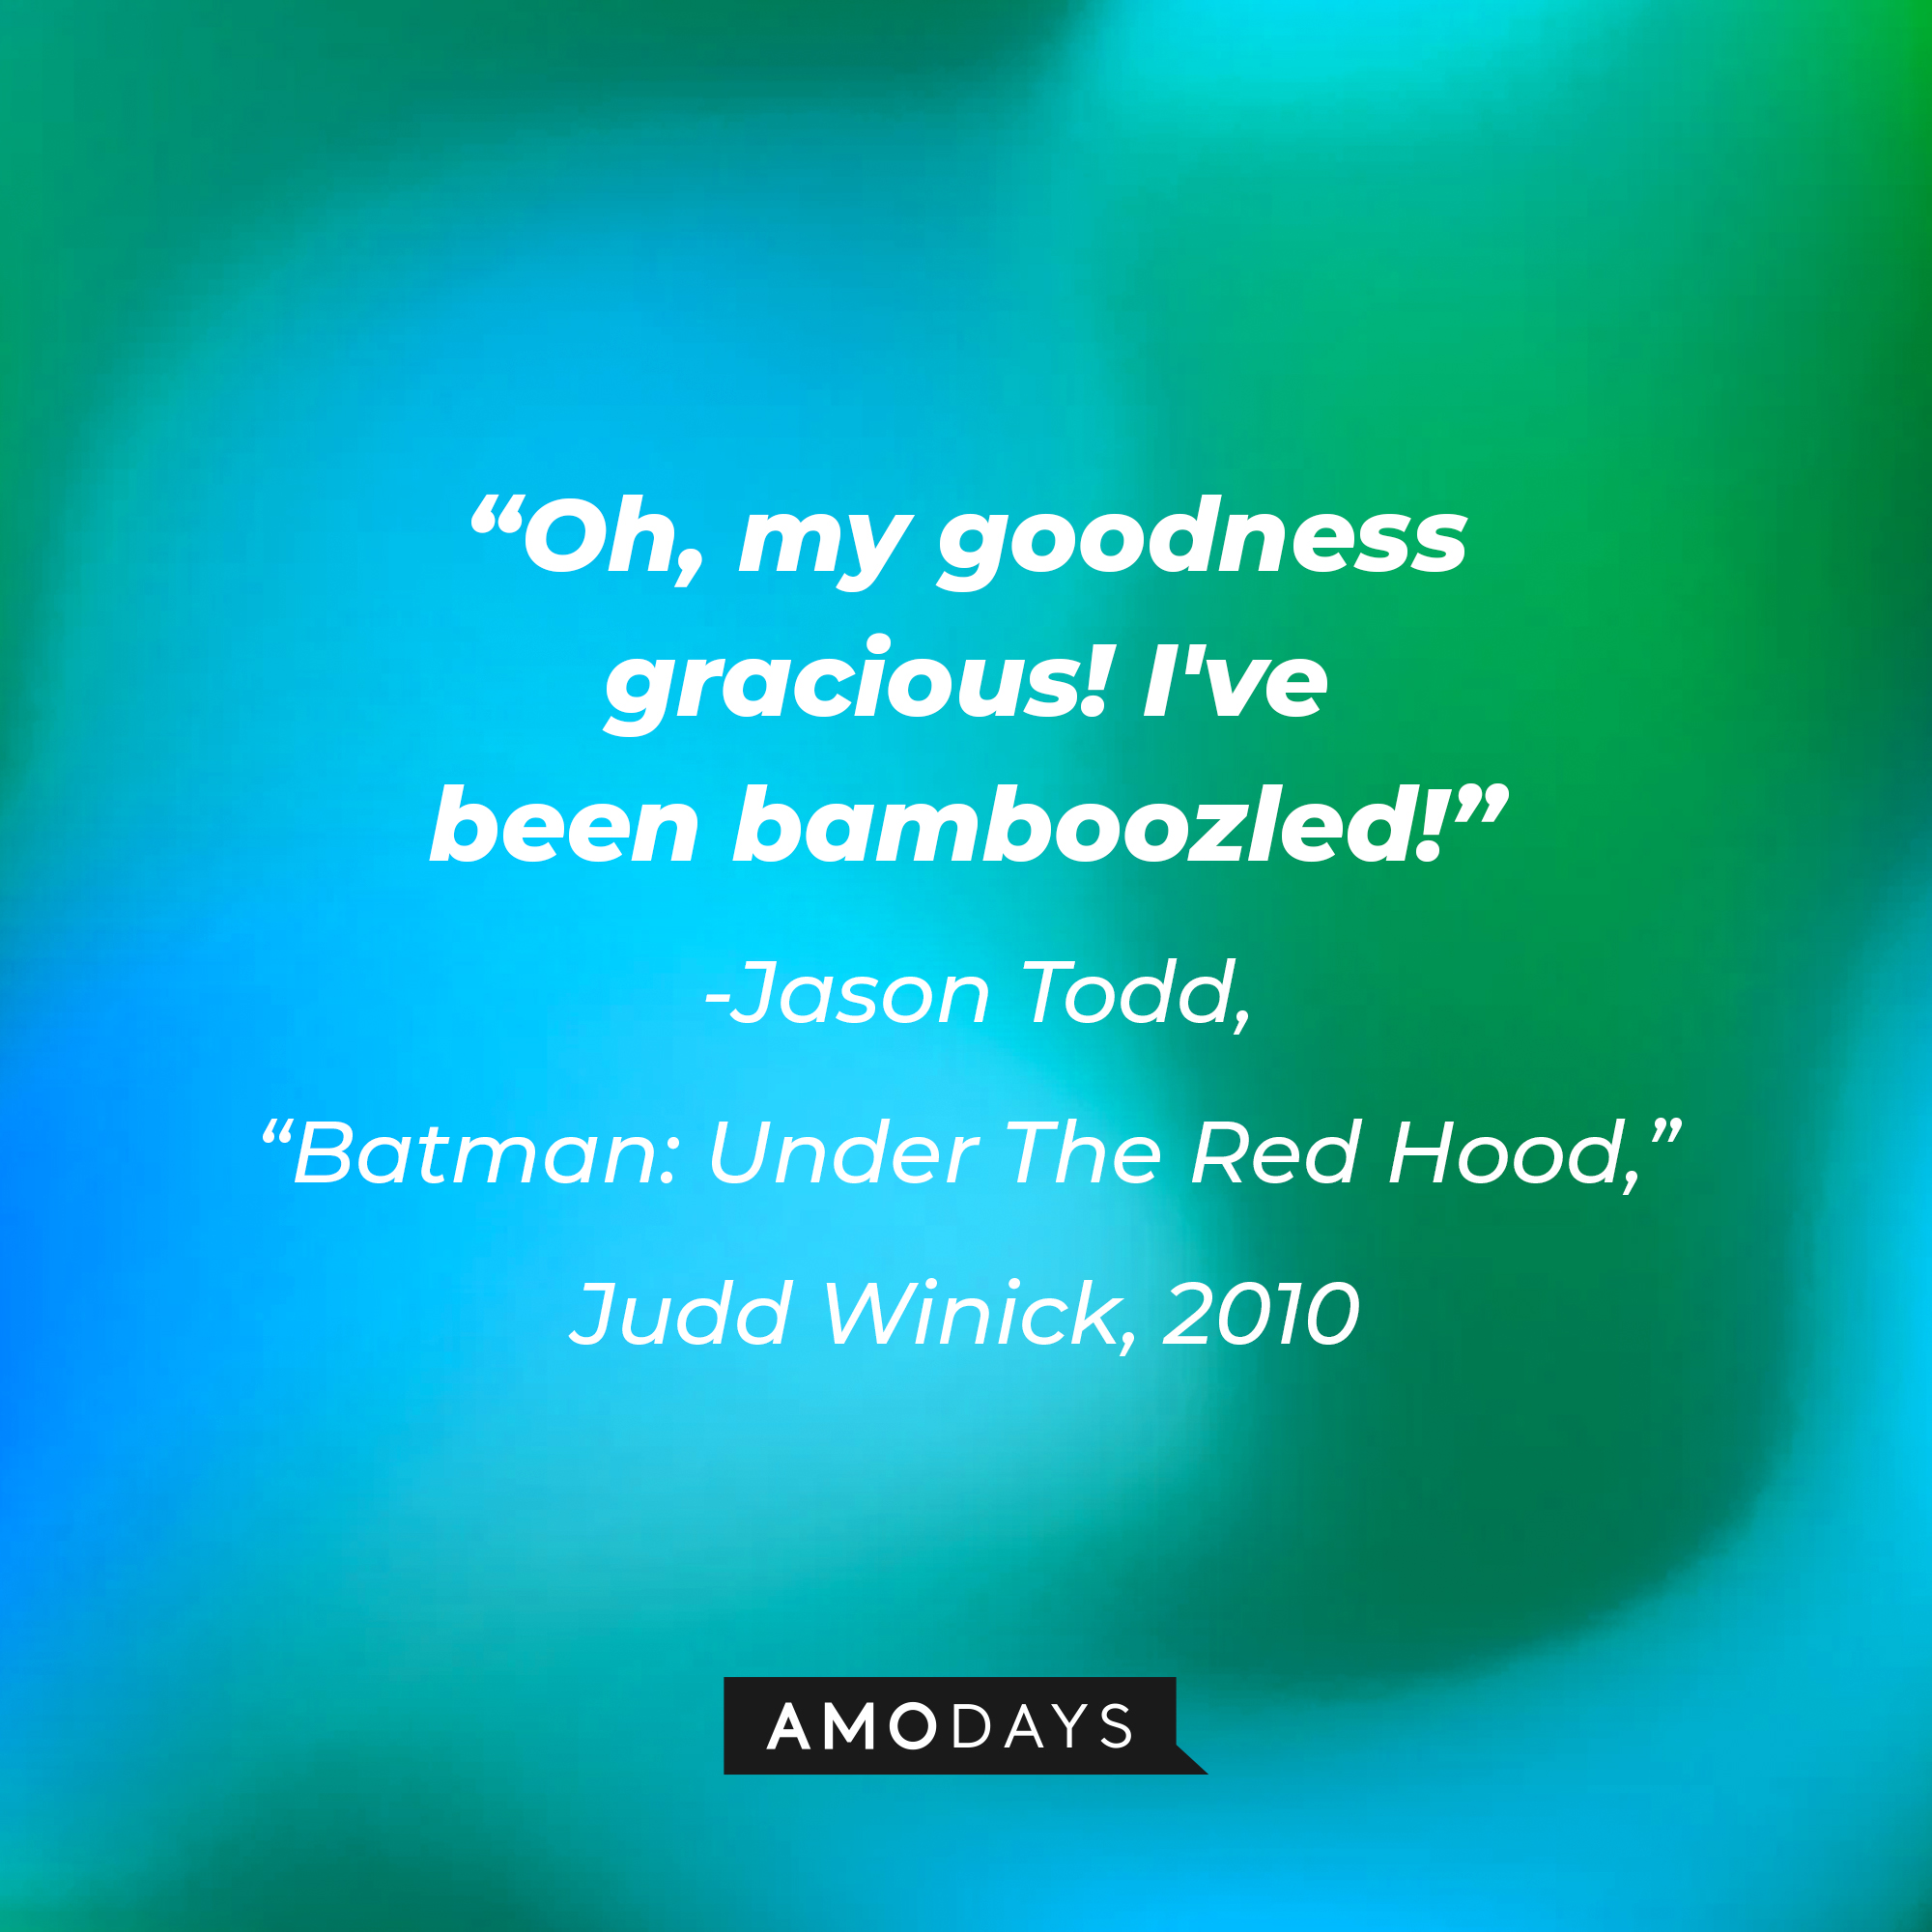 A quote from Jason Todd in "Batman: Under The Red Hood," Judd Winick, 2010: "Oh, my goodness gracious! I've been bamboozled!" | Source: AmoDays